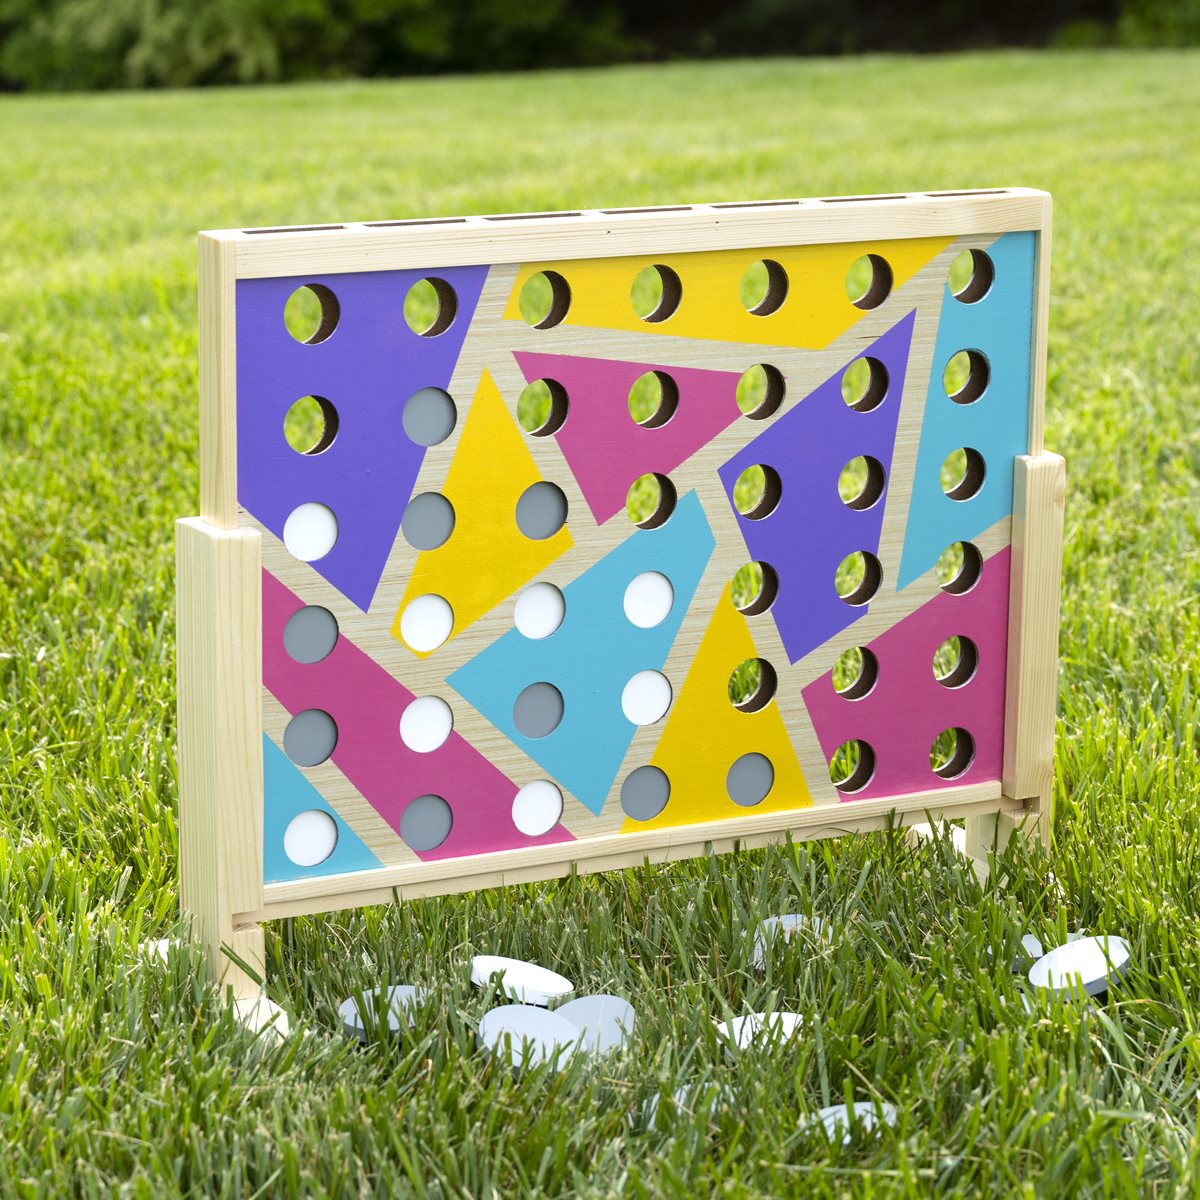 Giant Vertical Lawn Checkers